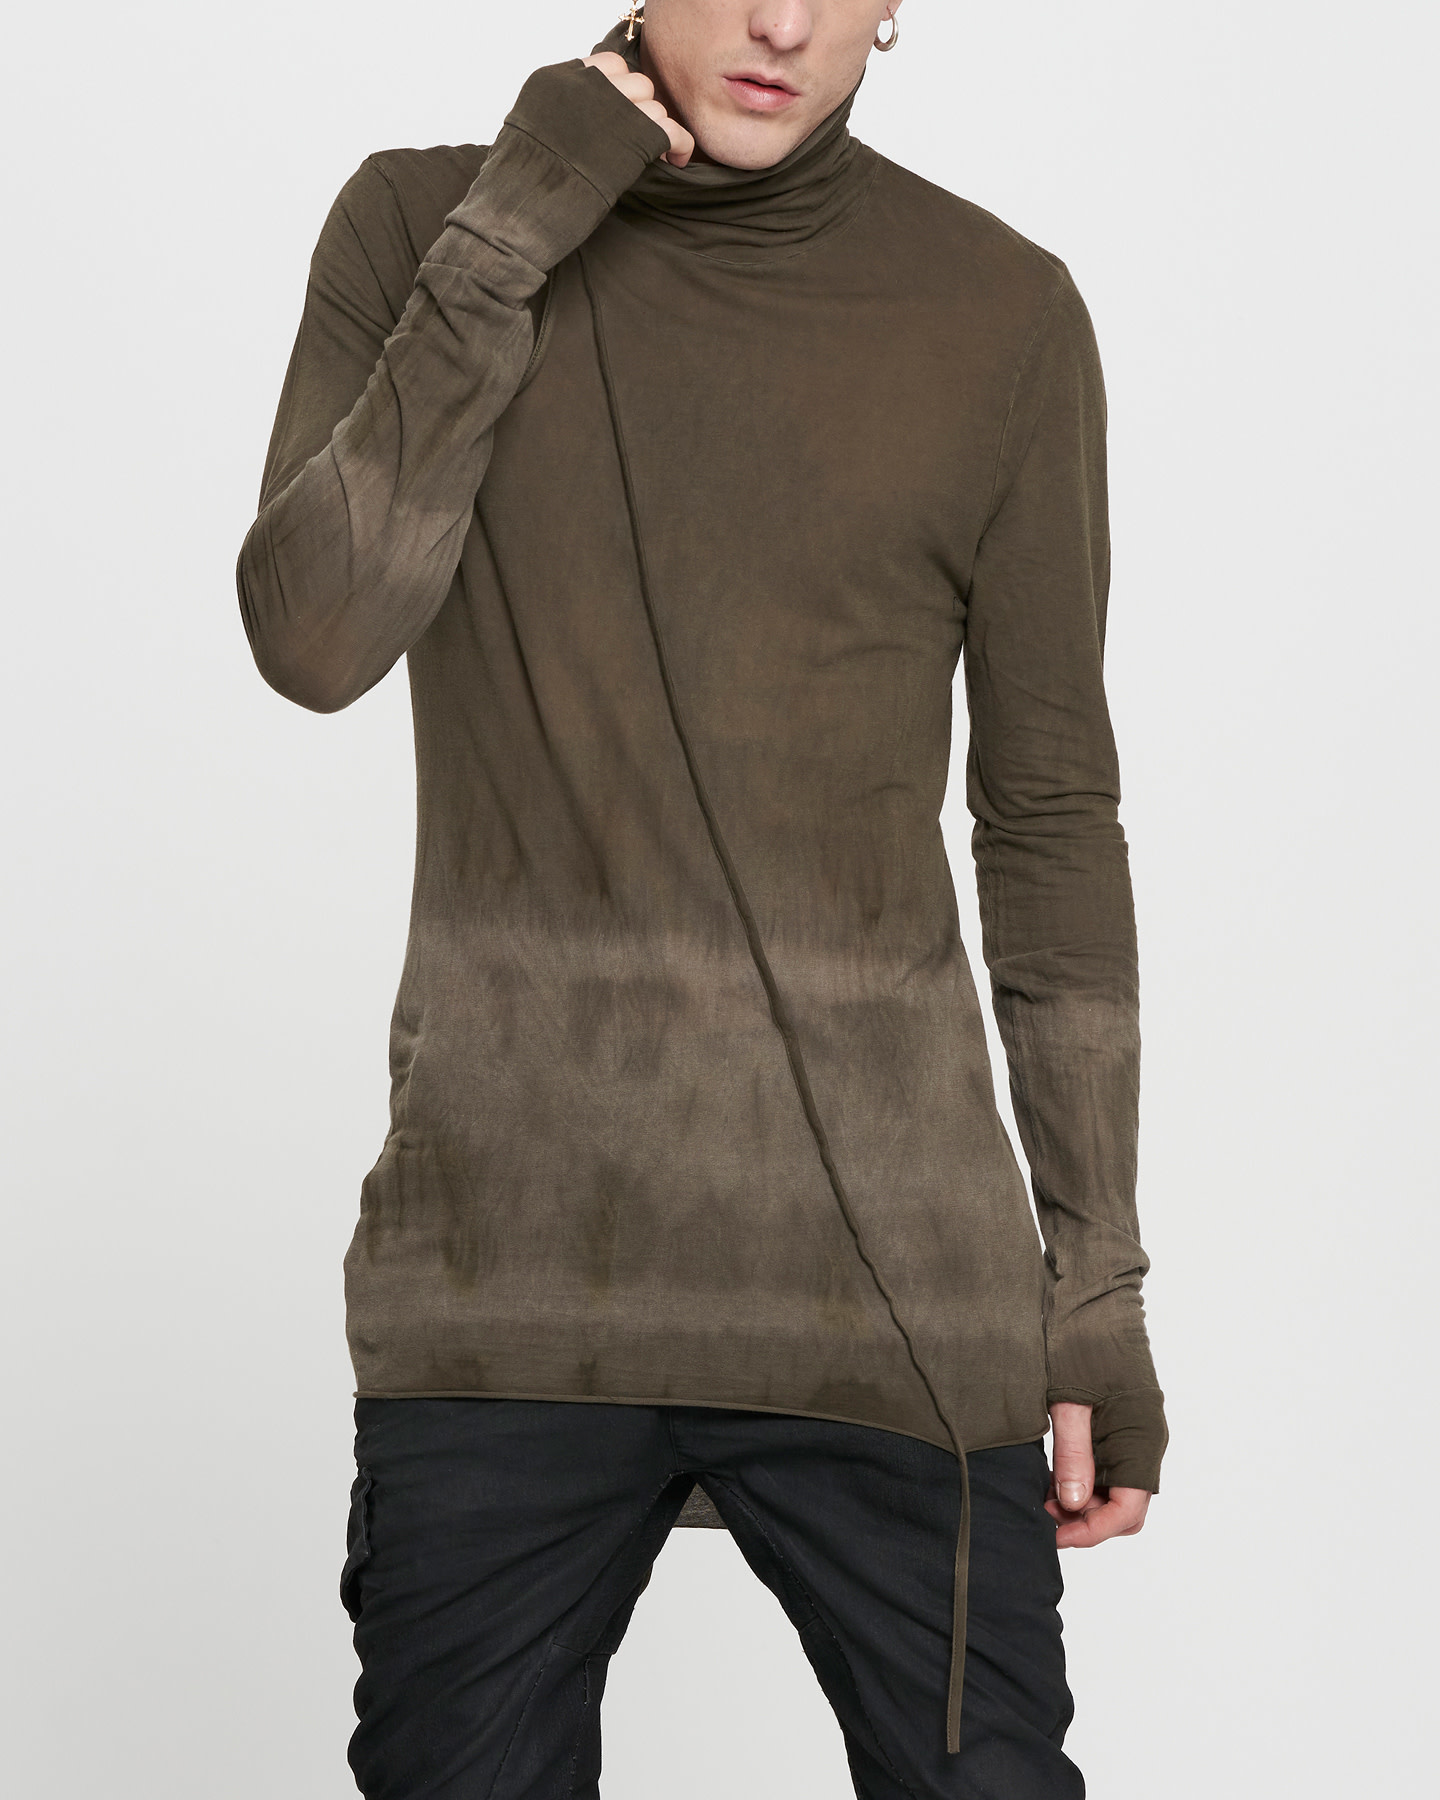 HIGH NECK T-SHIRT - KNOTTED DUST